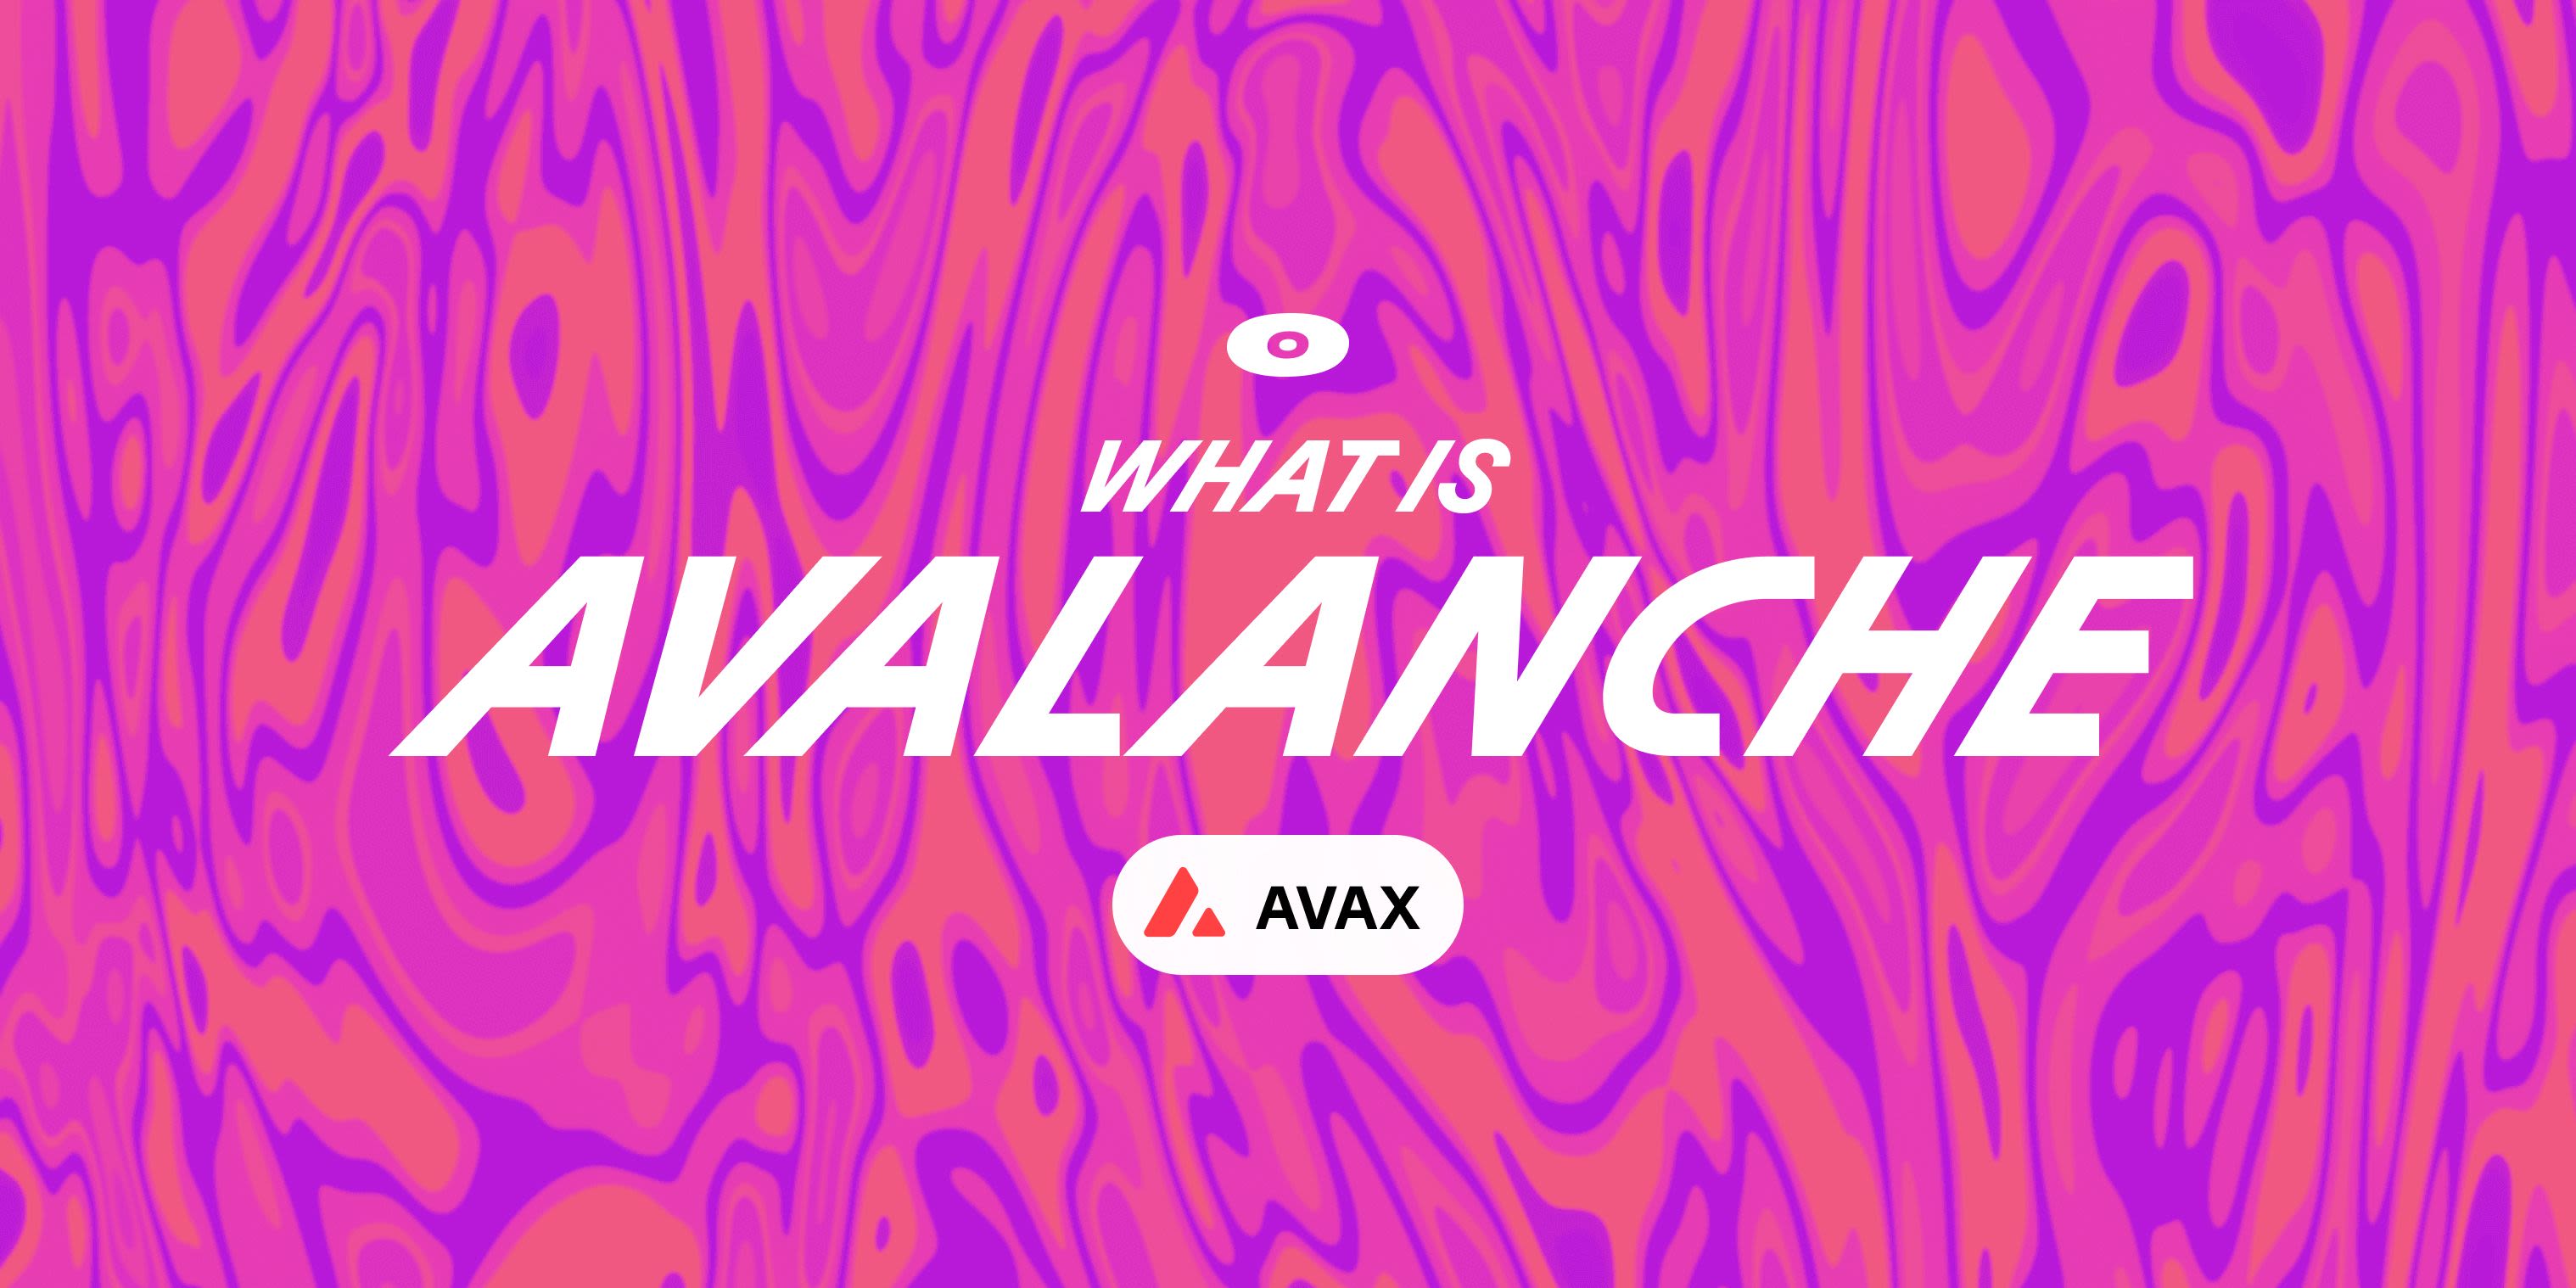 Cover image for 什么是AVALANCHE？